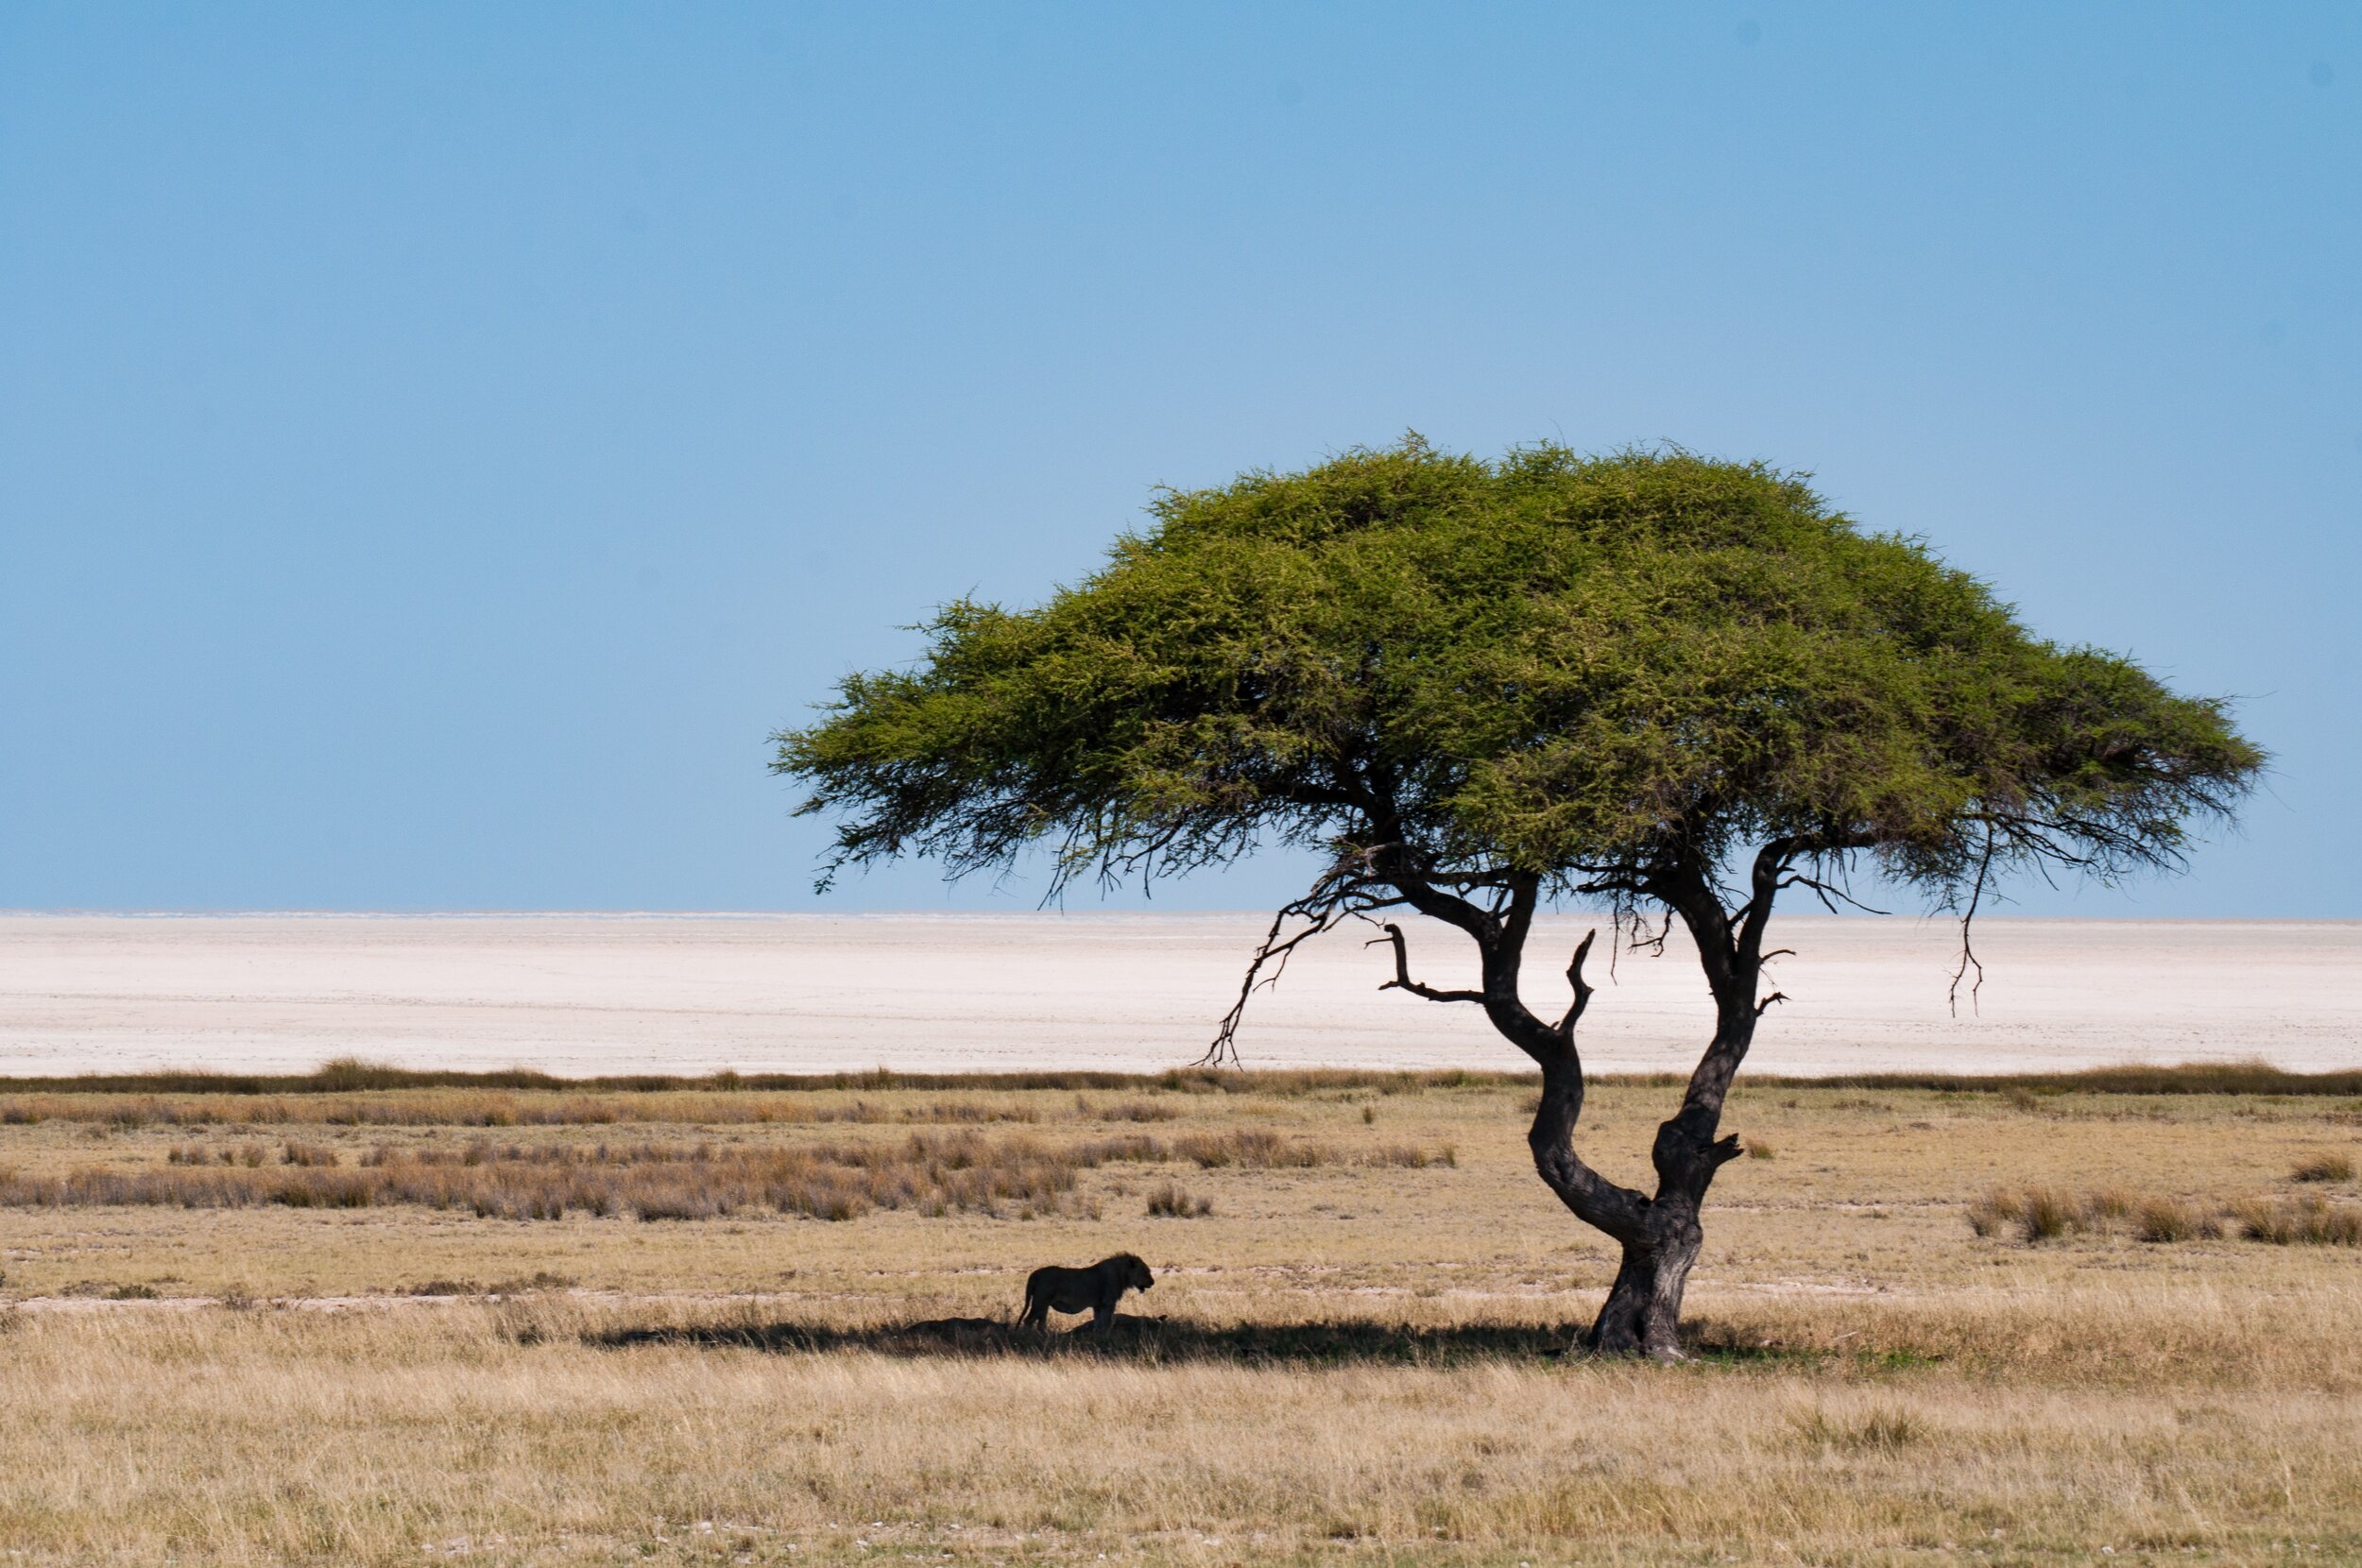 Lion under a tree in the desert of namibia